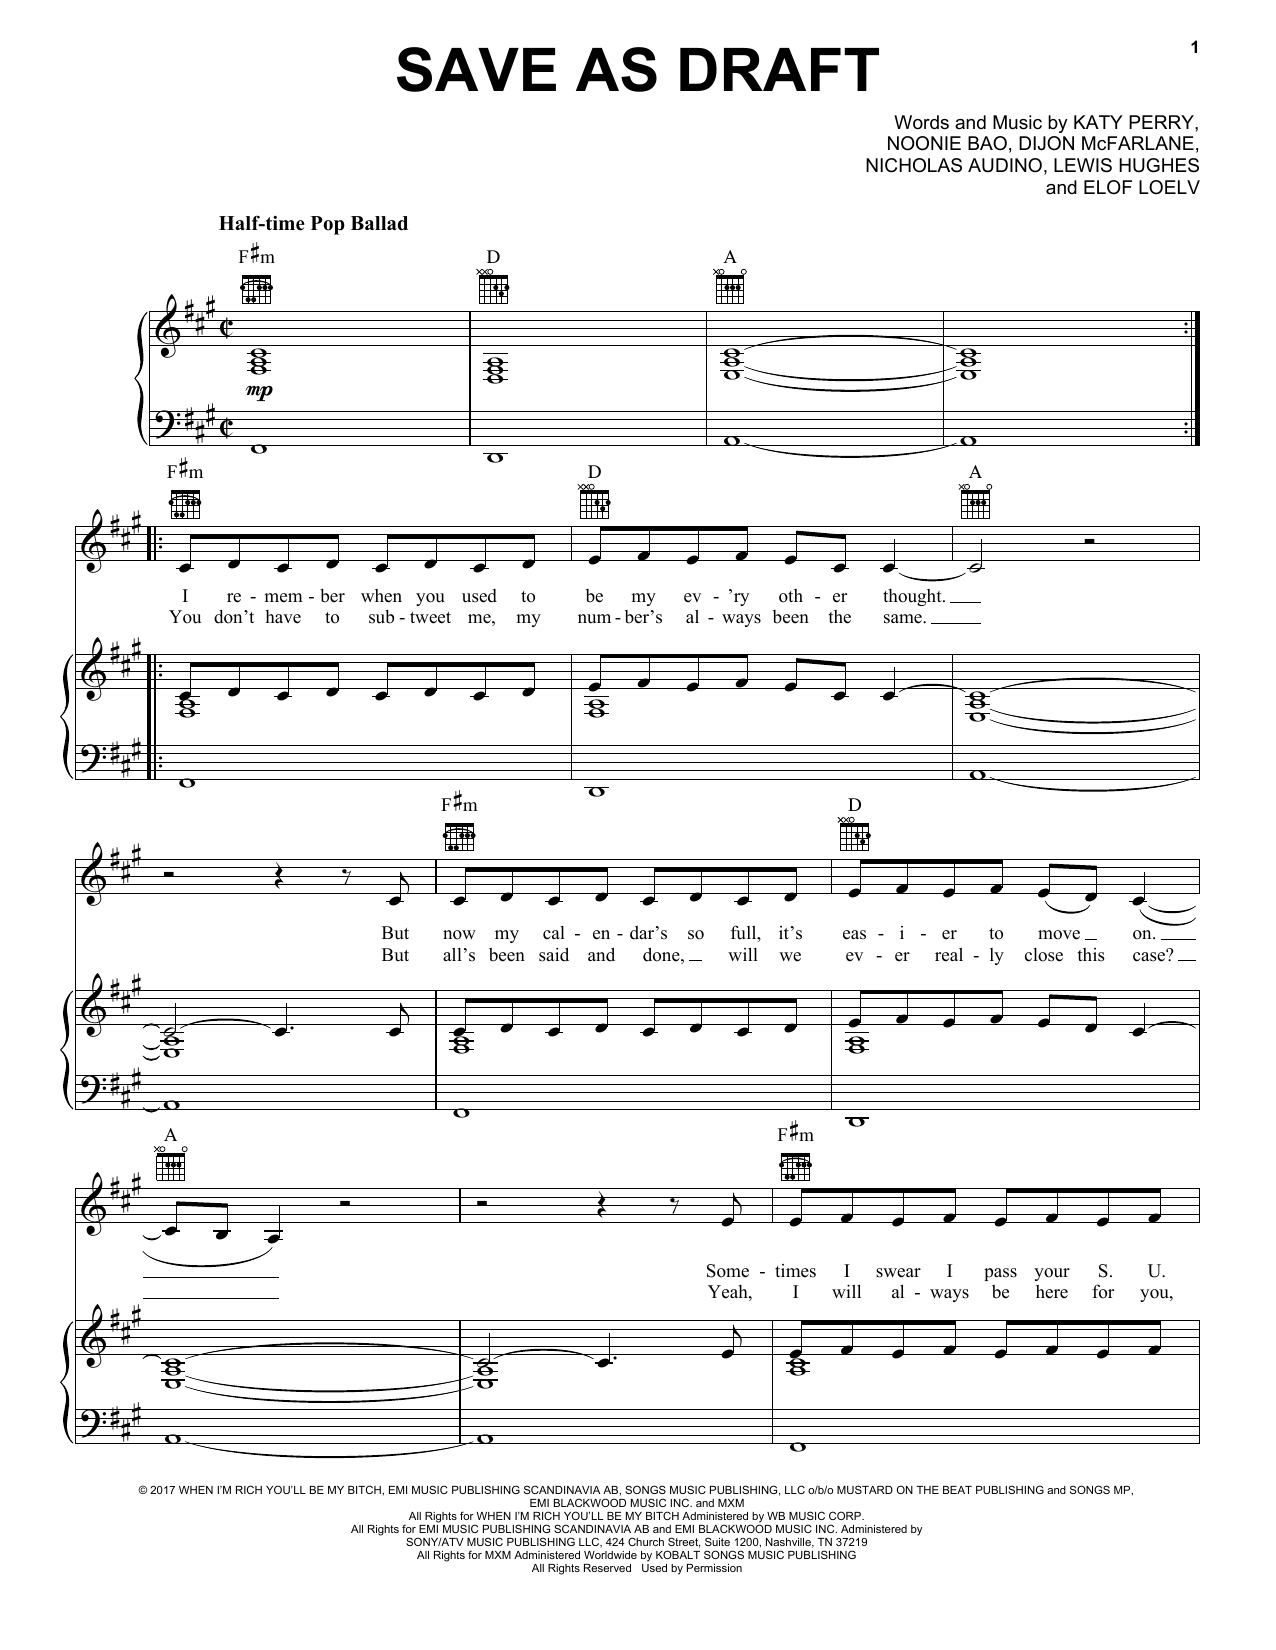 Download Katy Perry Save As Draft Sheet Music